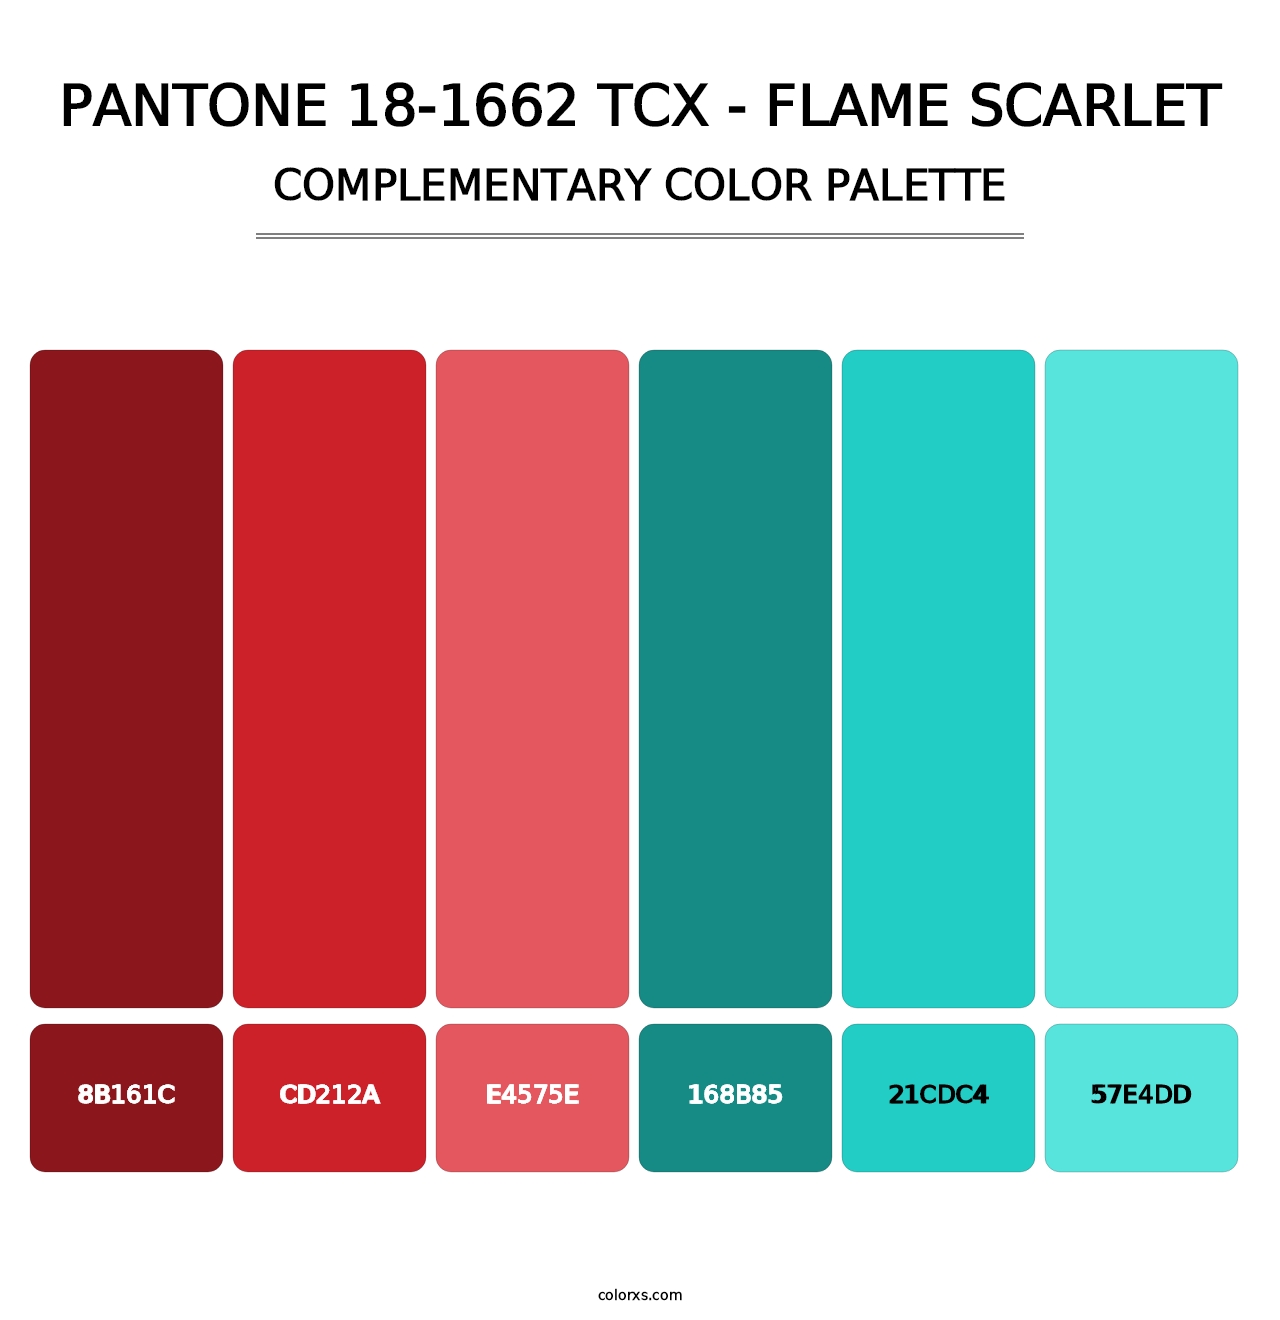 PANTONE 18-1662 TCX - Flame Scarlet - Complementary Color Palette